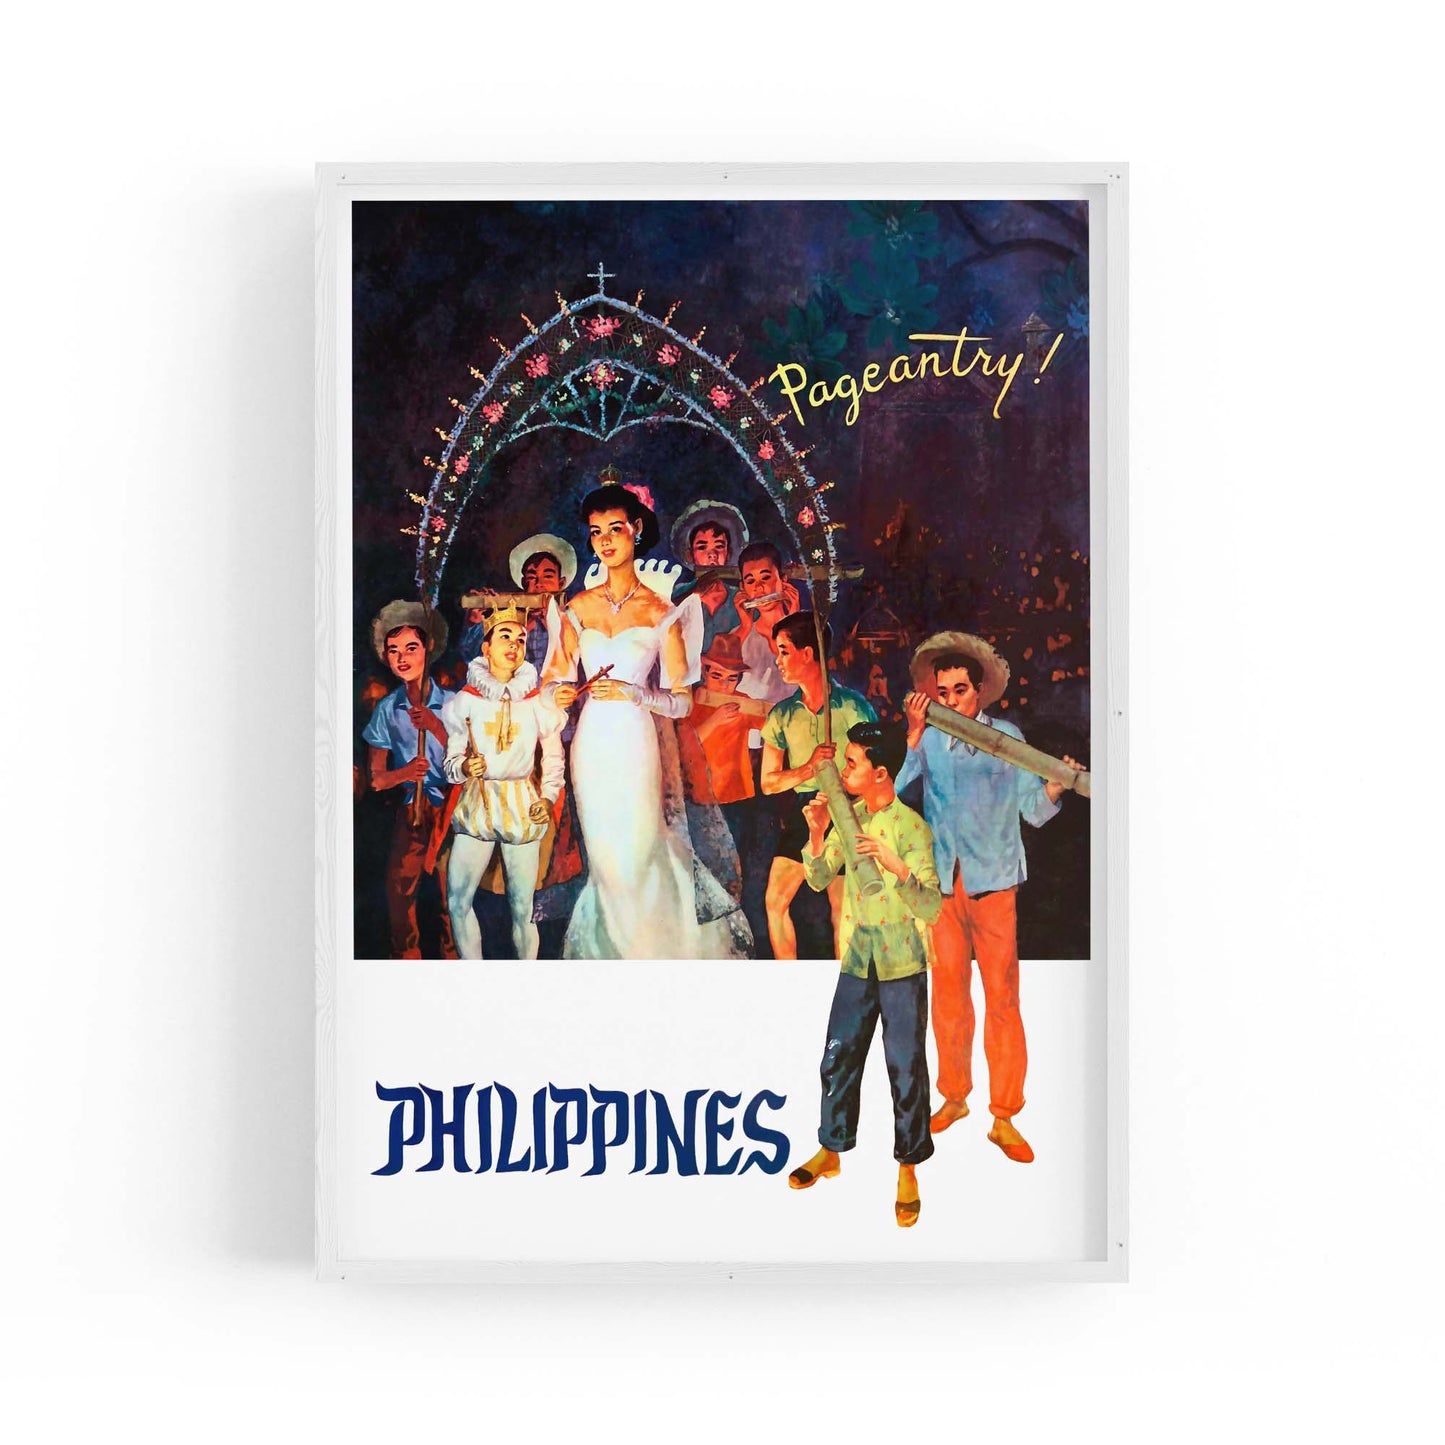 Philippines Pageantry Vintage Travel Advert Wall Art - The Affordable Art Company